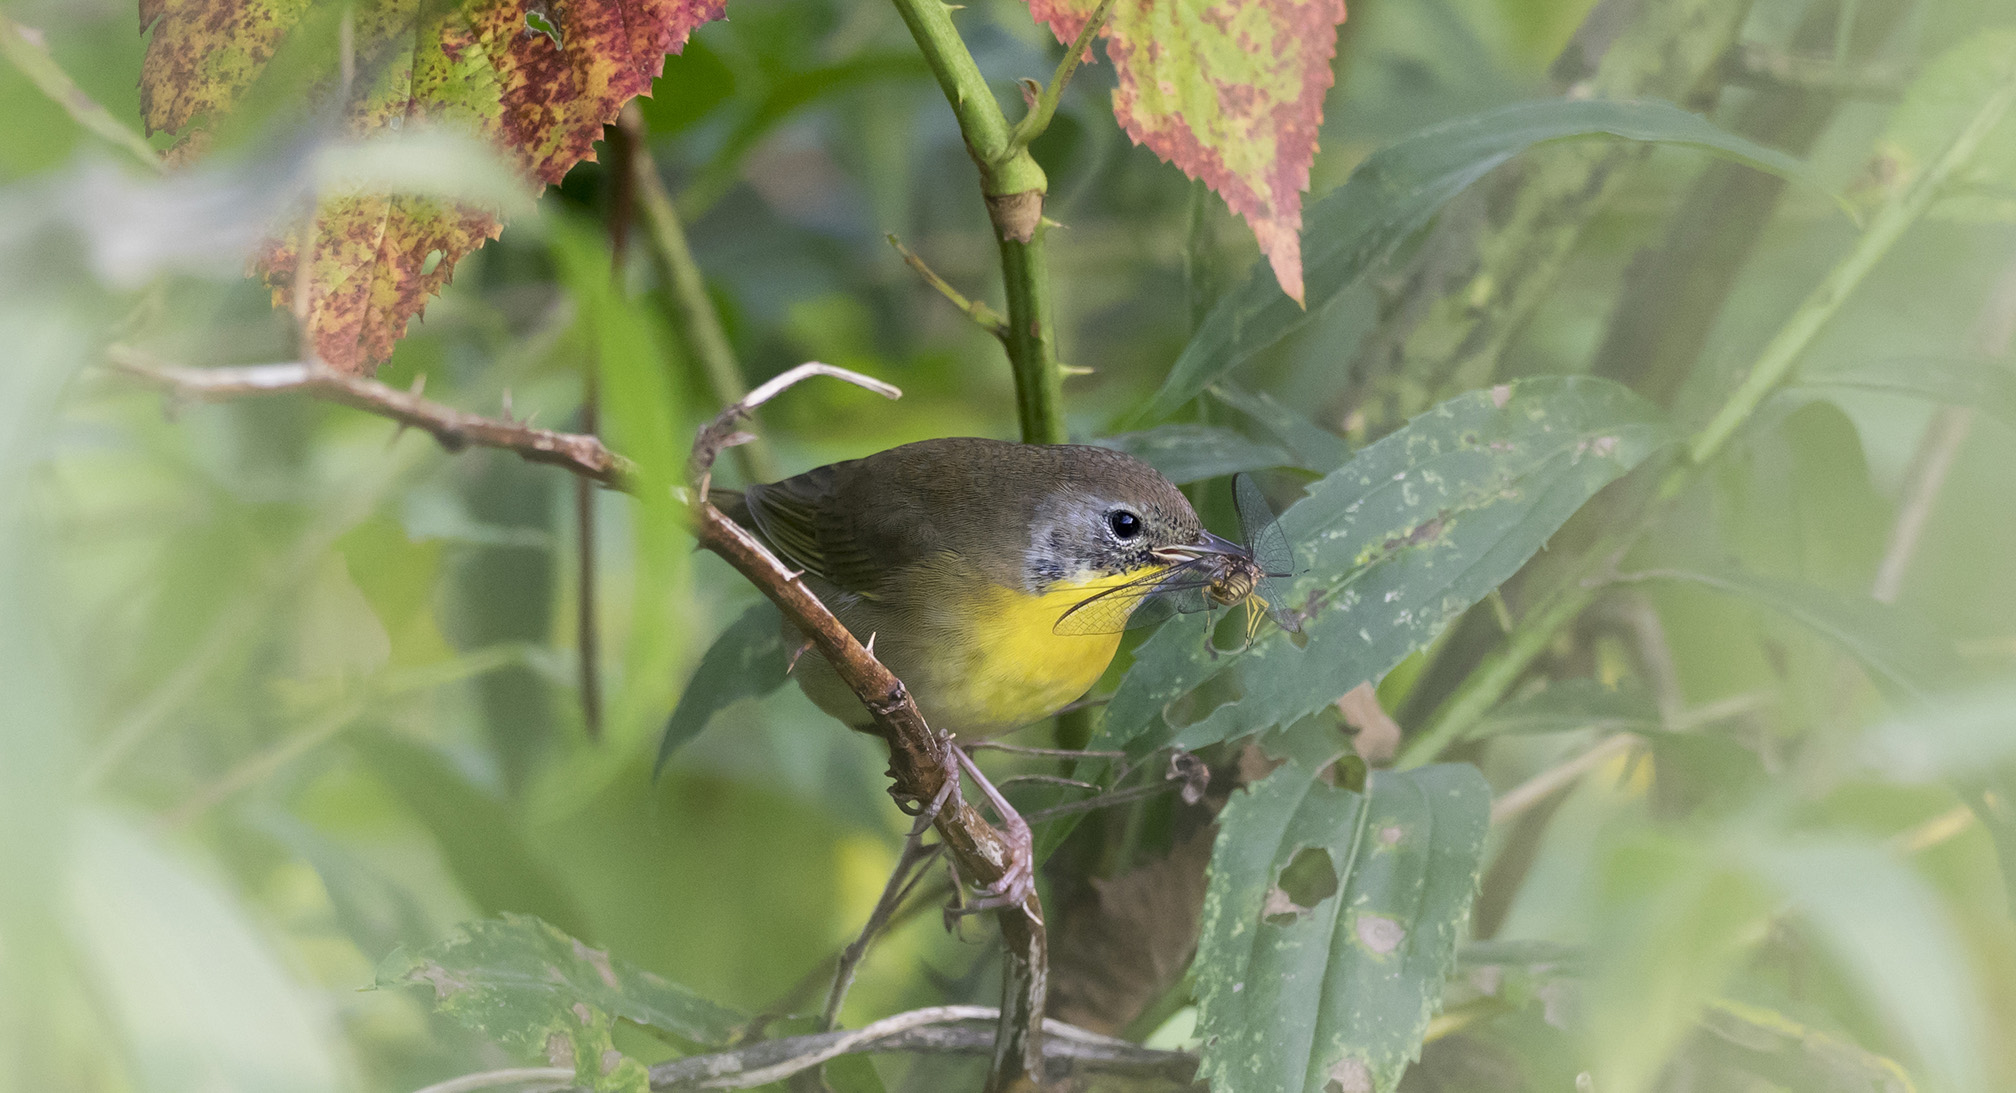 "A small bird perching between the green leaves of a tree. The bird has a bright yellow chin and breast and is dull brown on its head and back. In its mouth is a large insect."